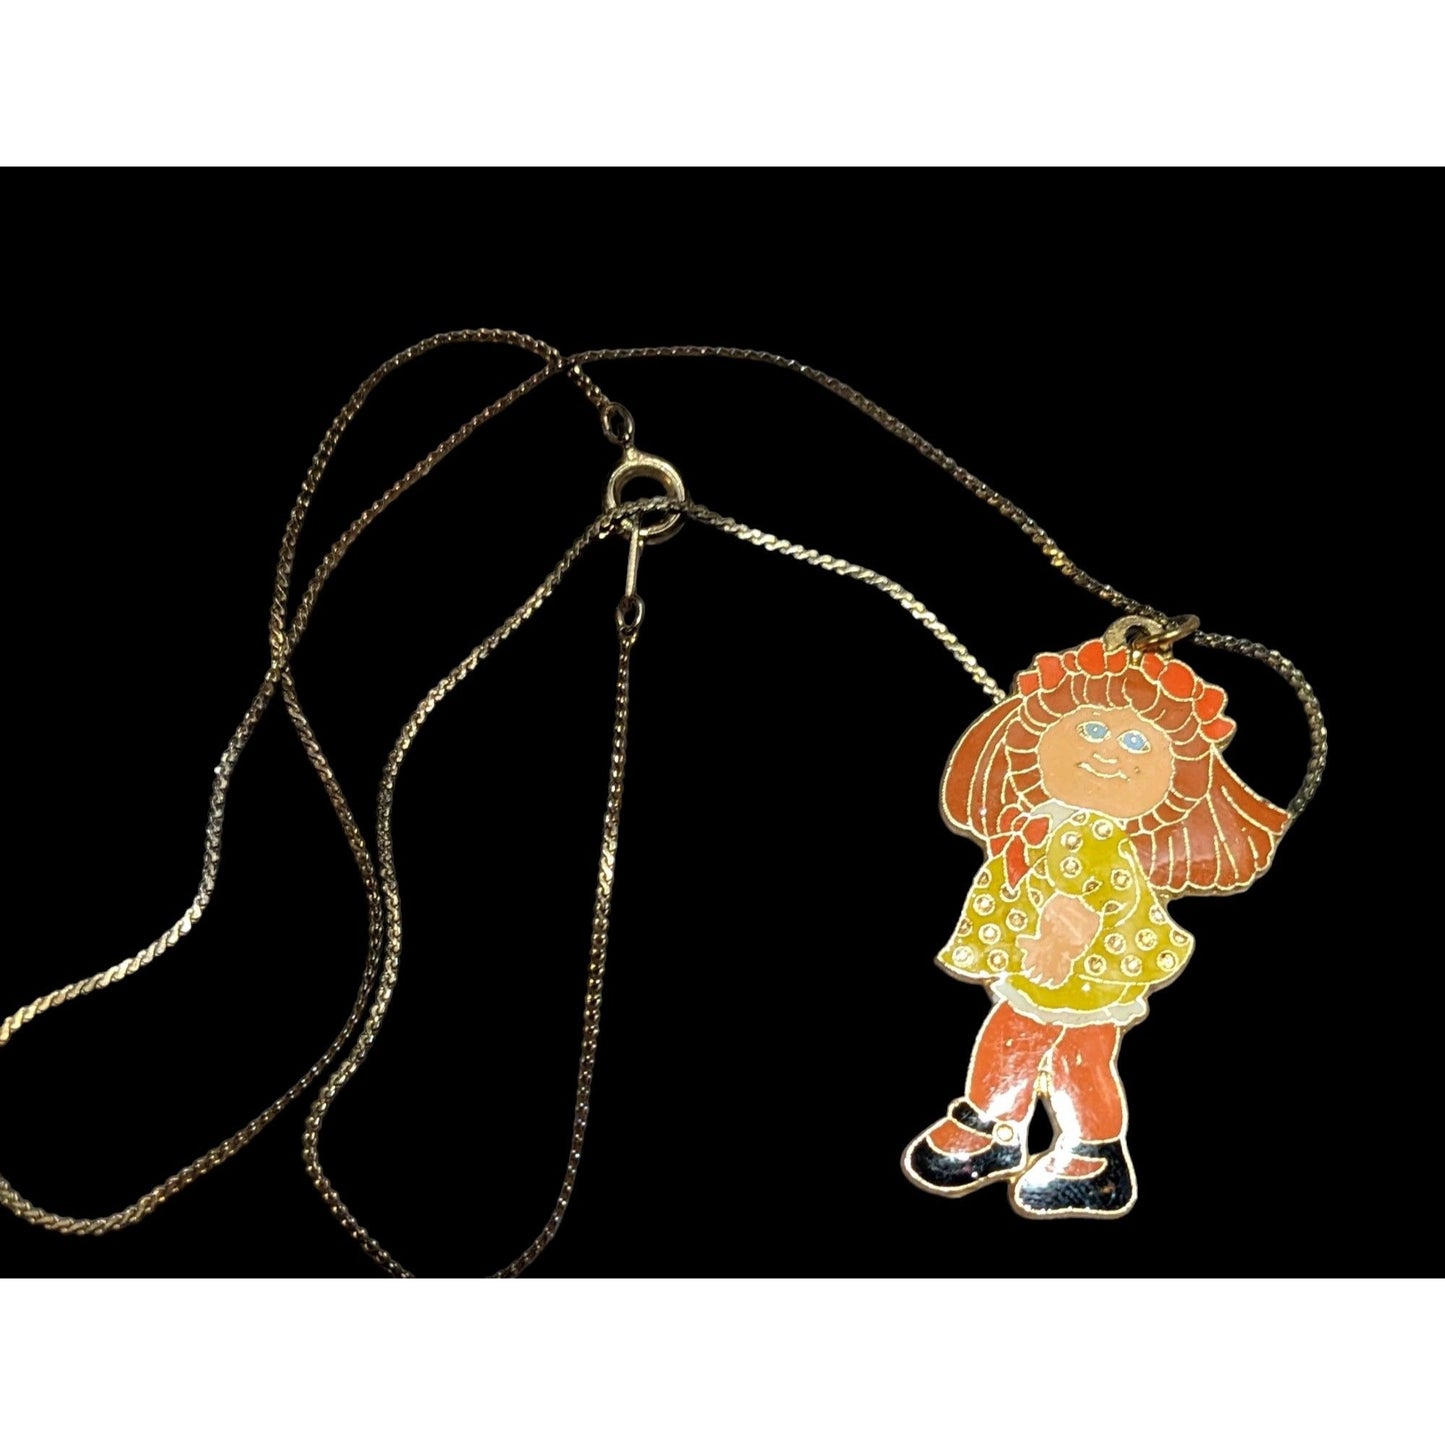 Vintage 80s Cabbage Patch Doll Necklace